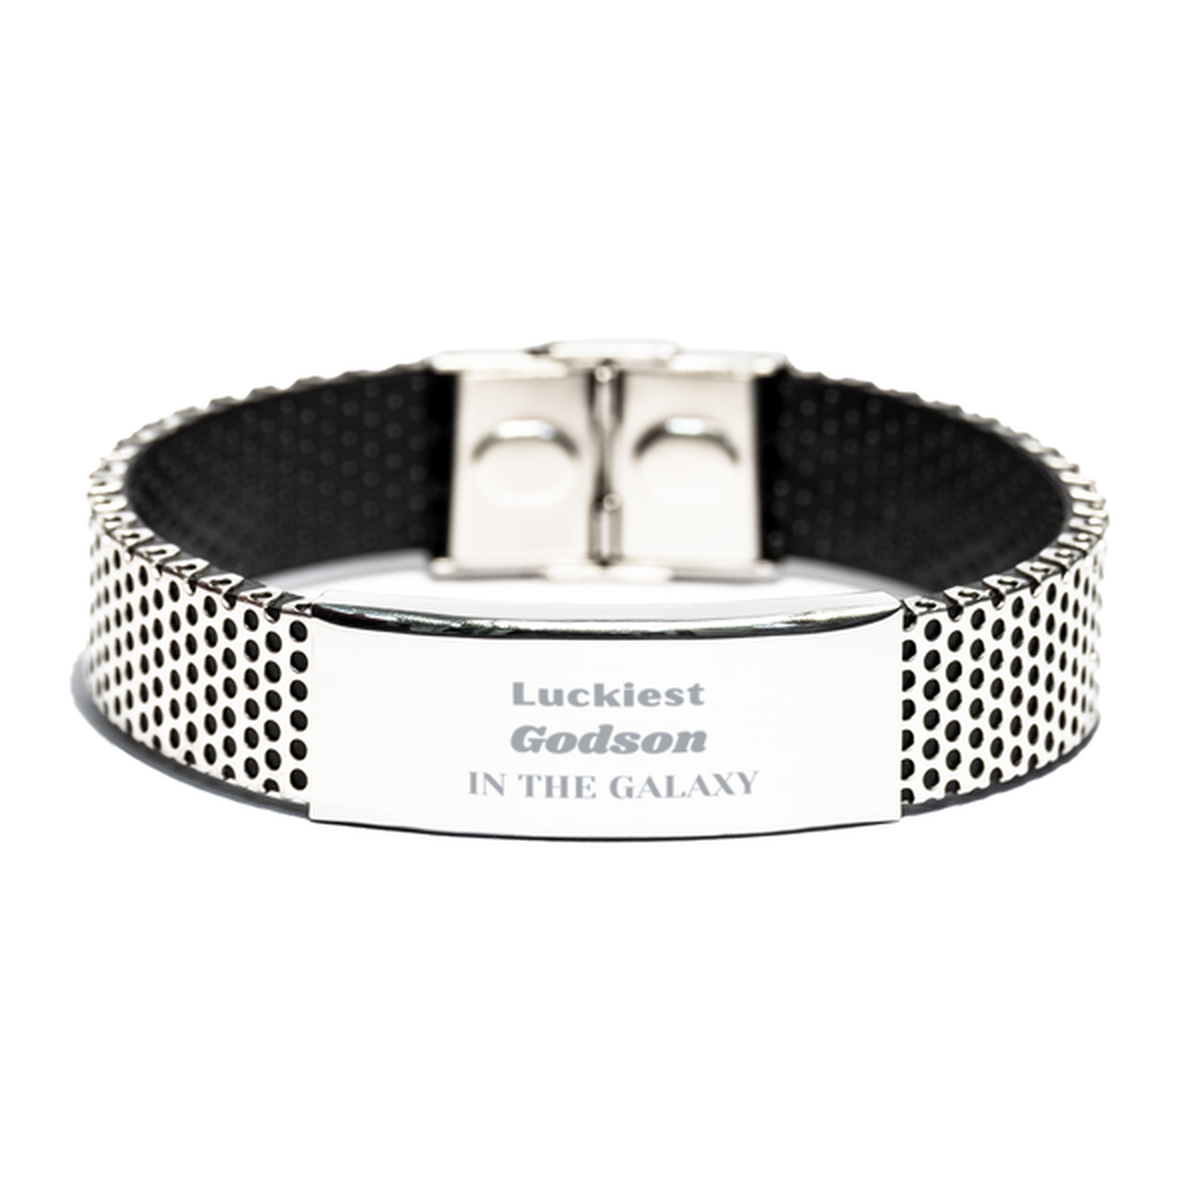 Luckiest Godson in the Galaxy, To My Godson Engraved Gifts, Christmas Godson Stainless Steel Bracelet Gifts, X-mas Birthday Unique Gifts For Godson Men Women